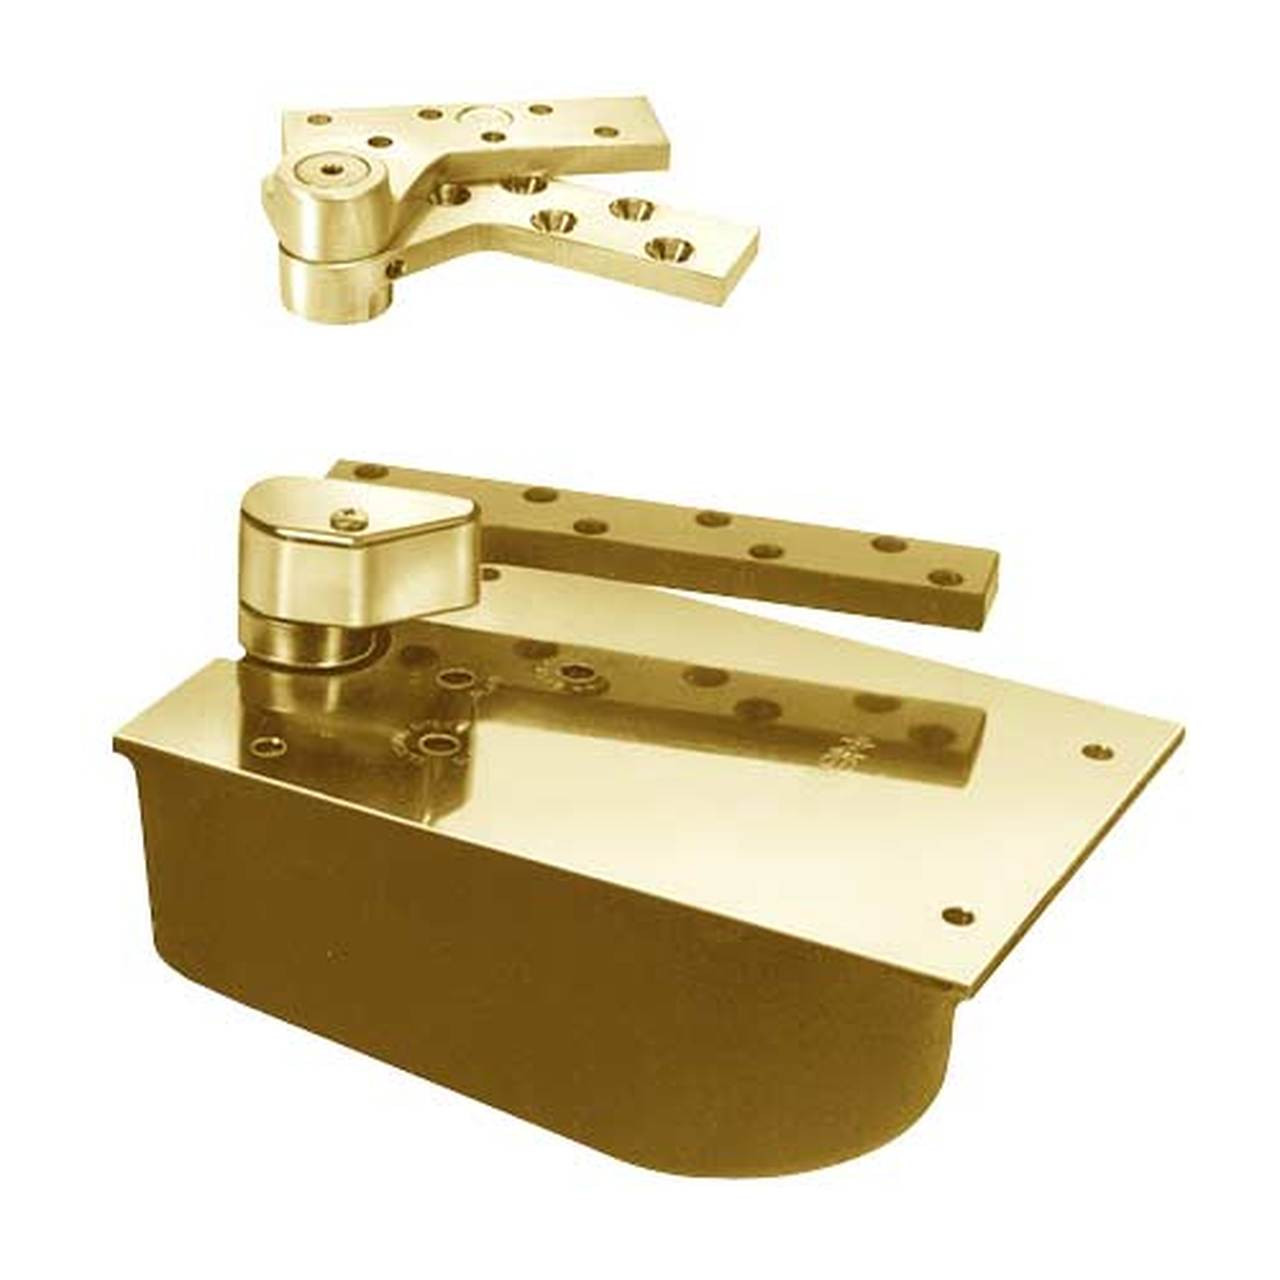 L27-85S-LFP-LCC-RH-1-3/4-605 Rixson 27 Series Extra Heavy Duty Lead Lined Offset Floor Closer in Bright Brass Finish